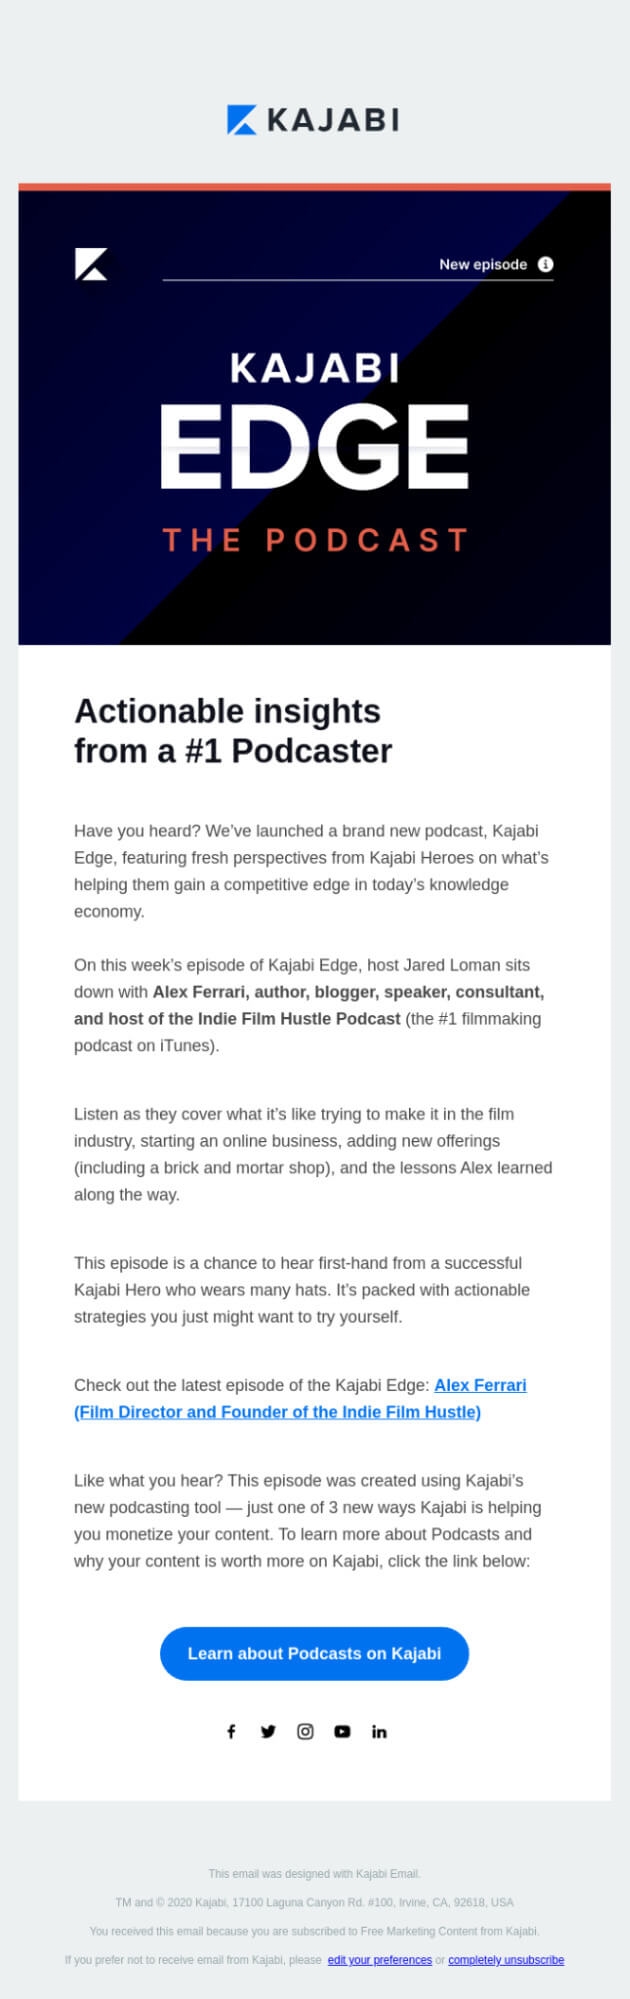 10 Product Announcement Email Examples (and What You Can Learn from Them)